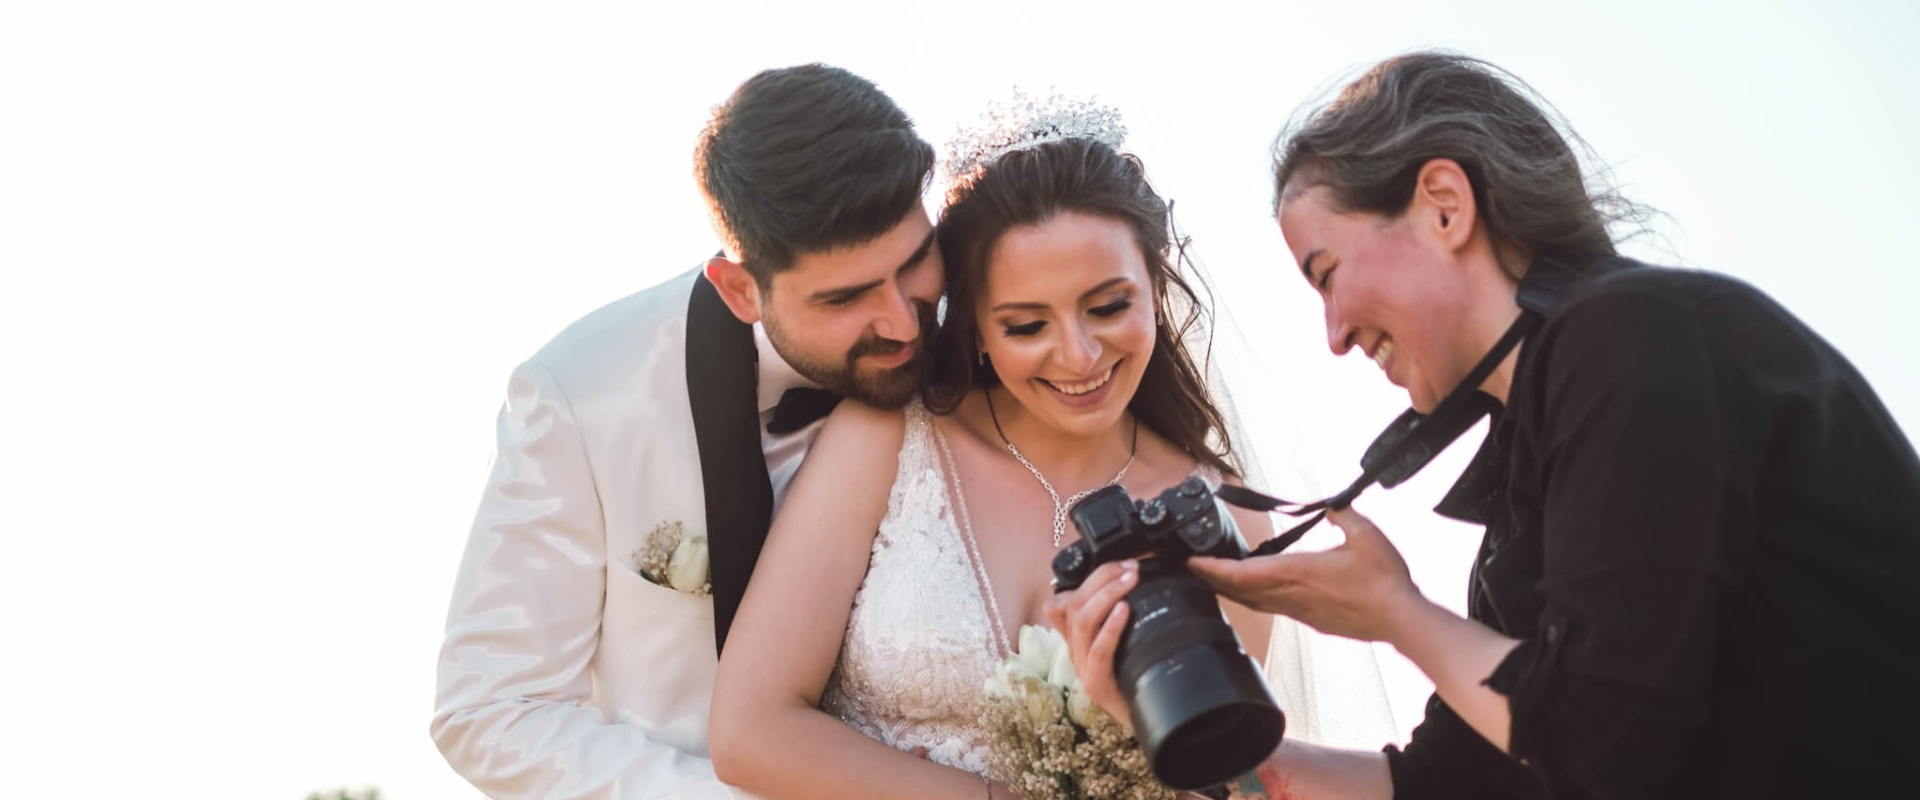 How Many Photos Should a Wedding Photographer Give to Their Clients?